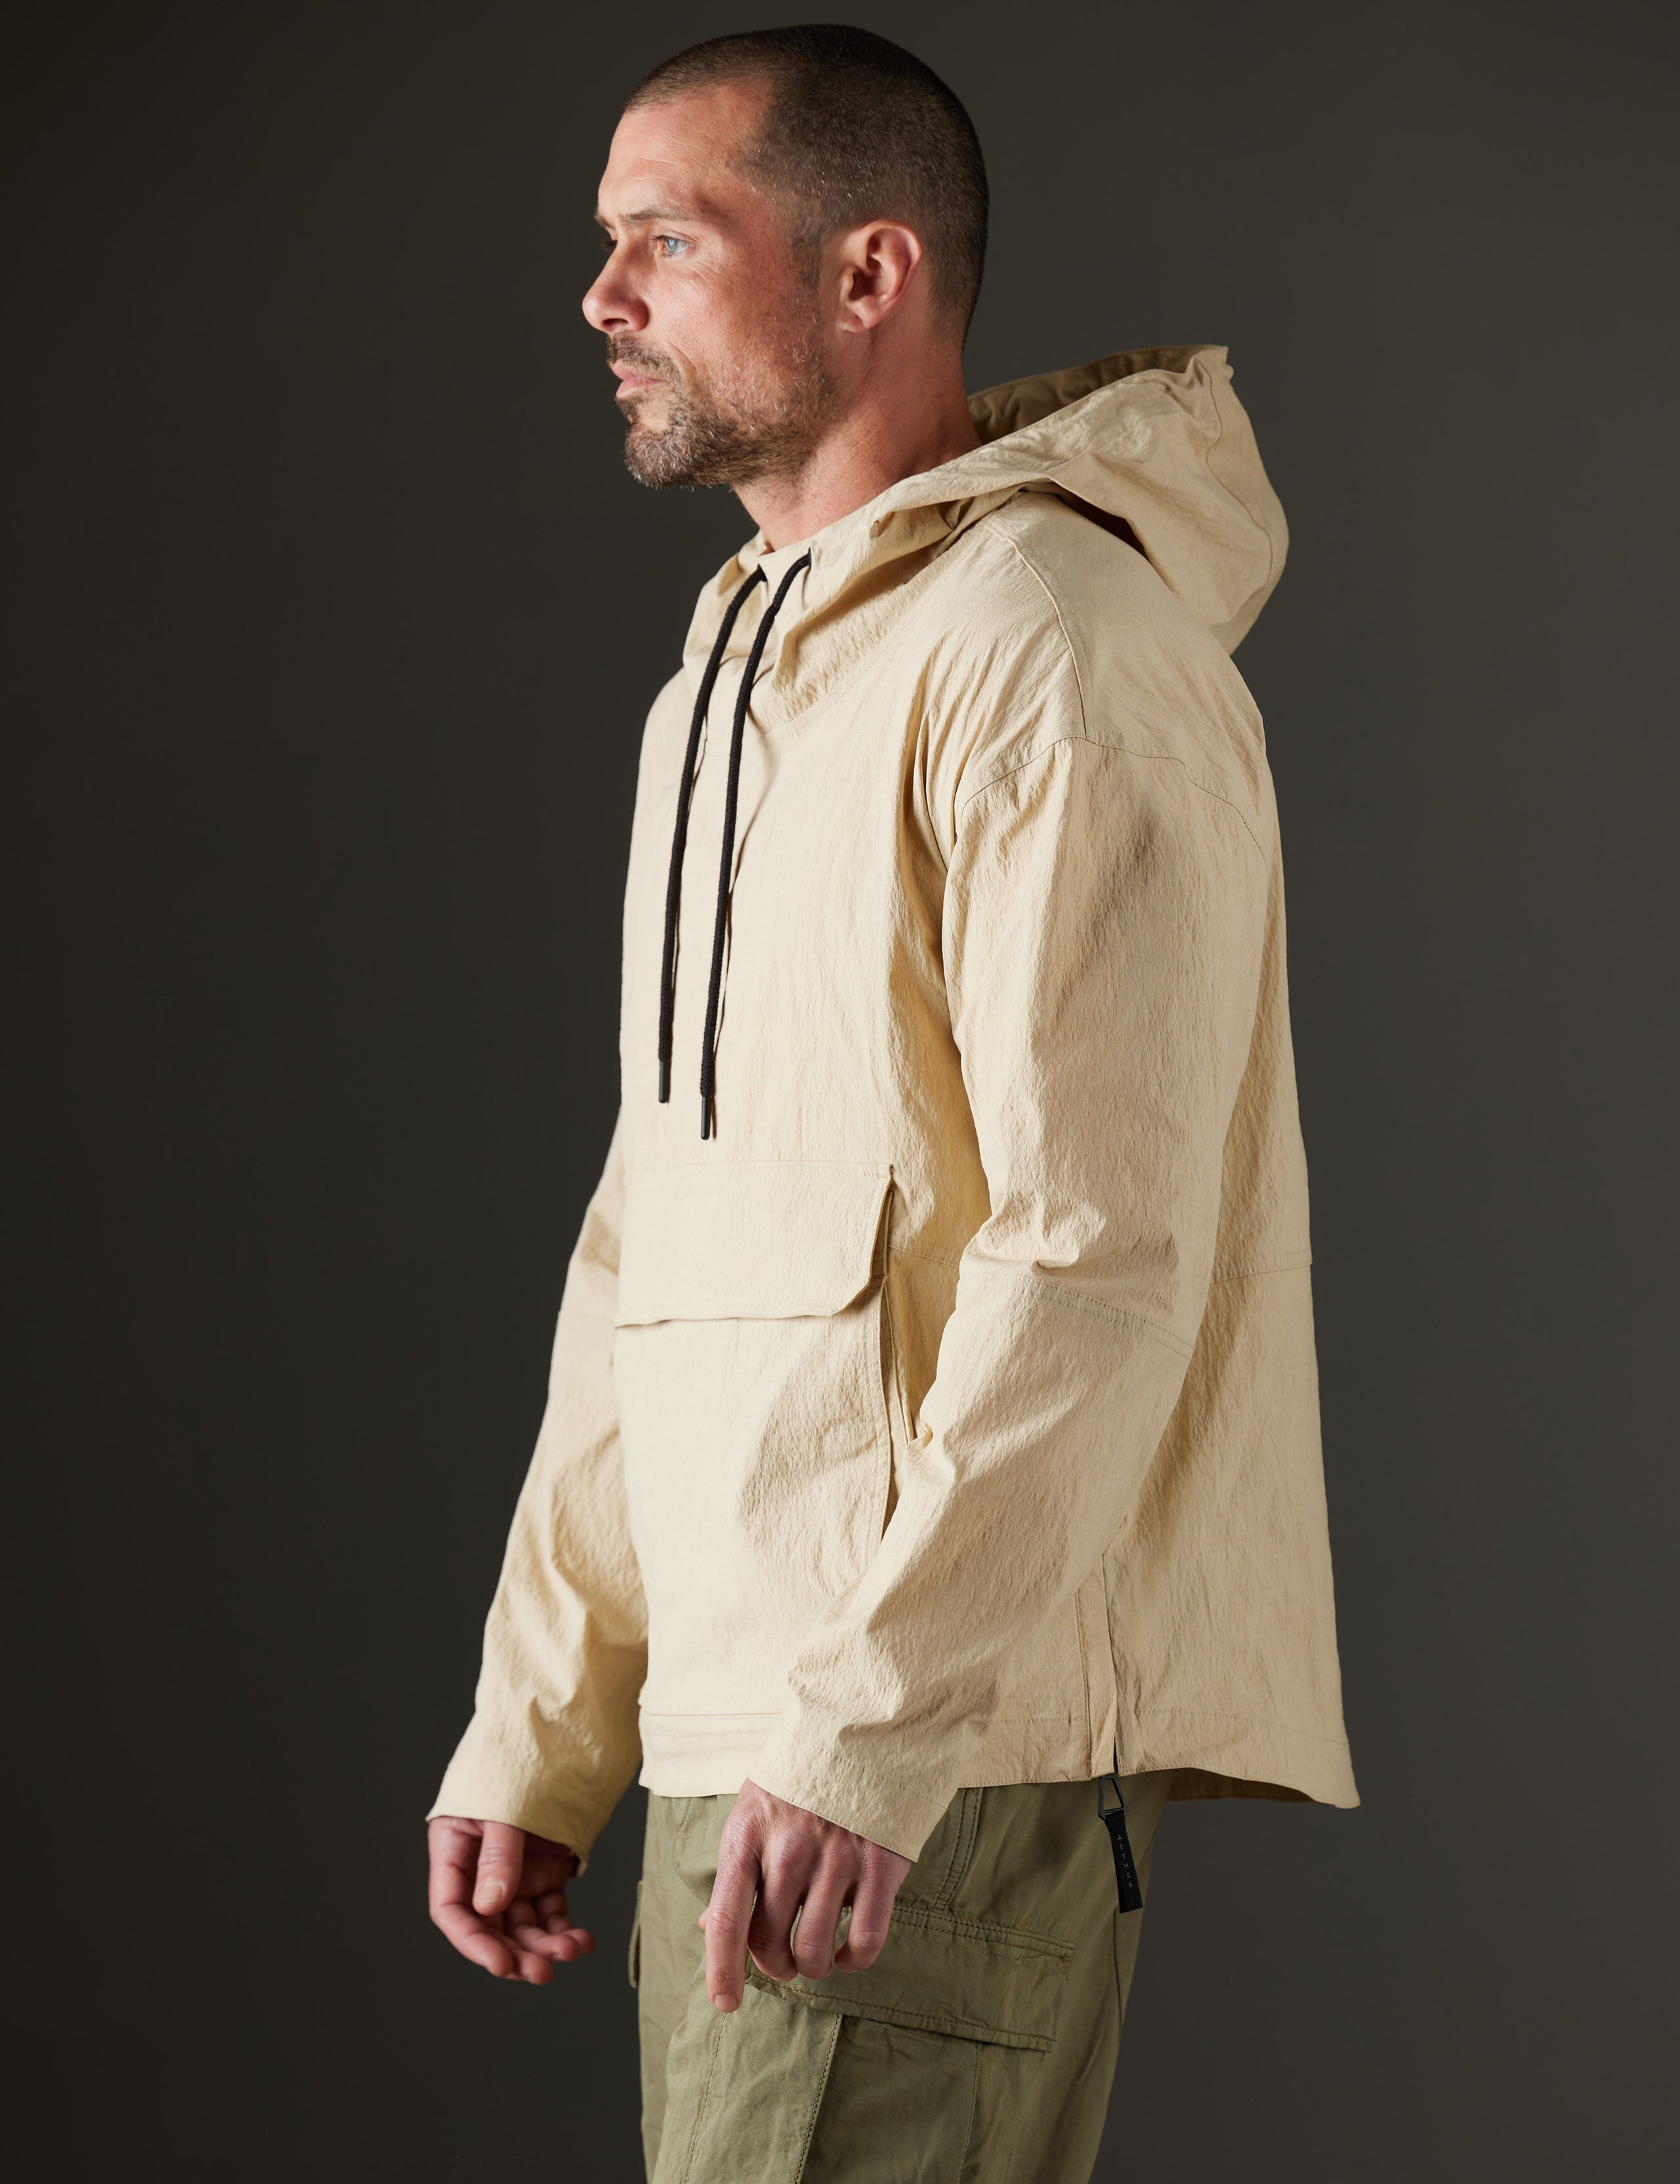 Man wearing beige anorak from AETHER Apparel